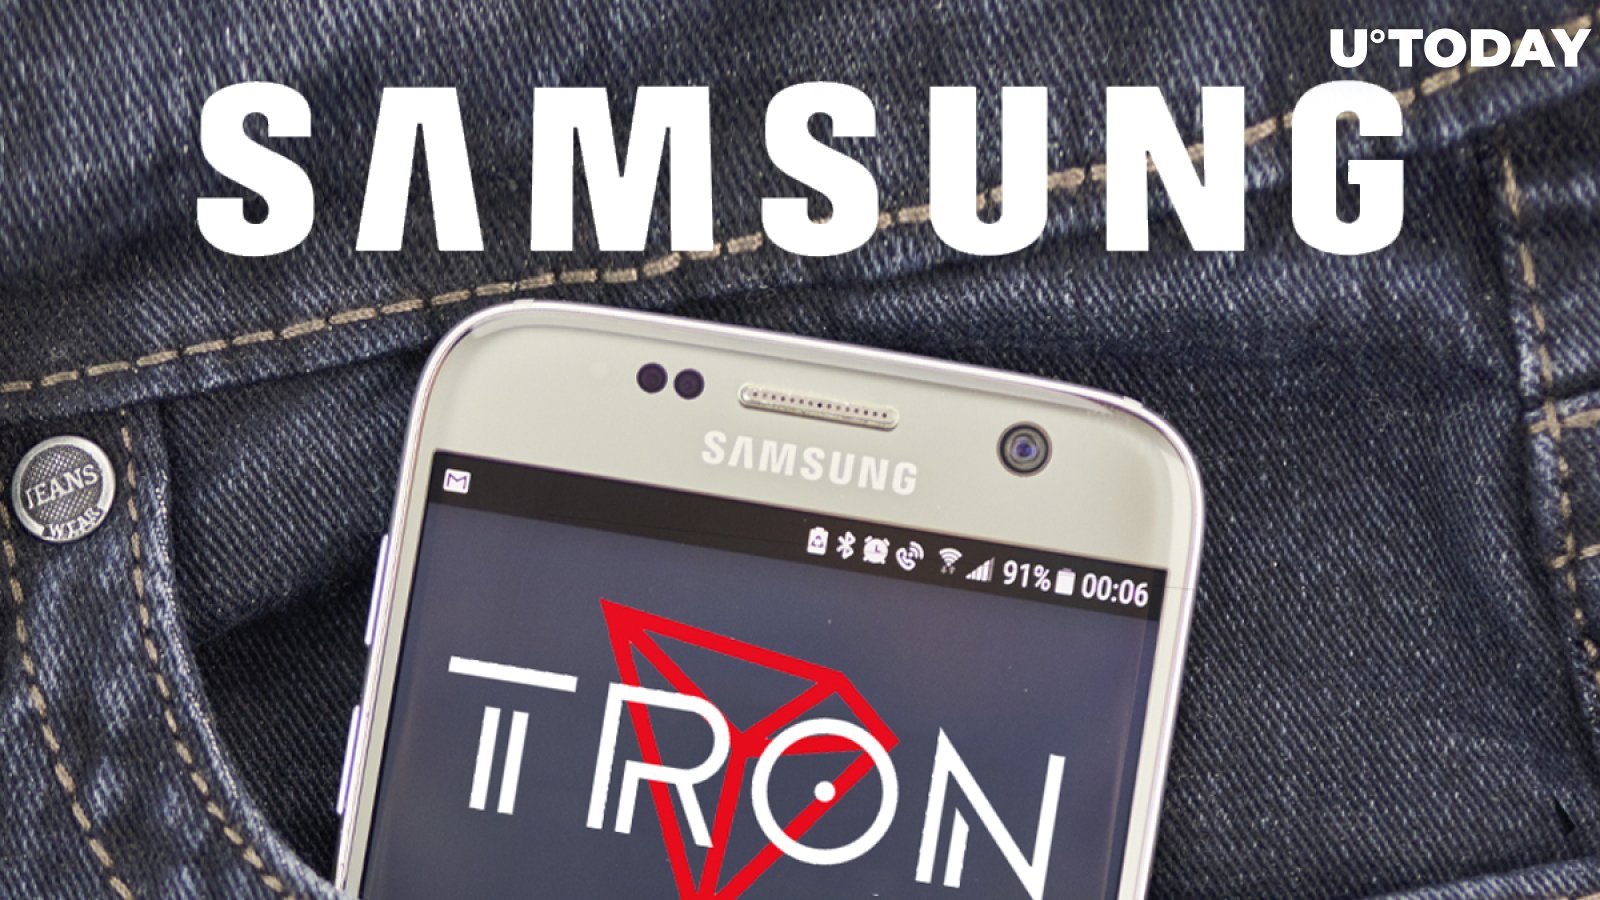 It's Official: Tron CEO Justin Sun Confirms Much-Hyped Partnership with Samsung